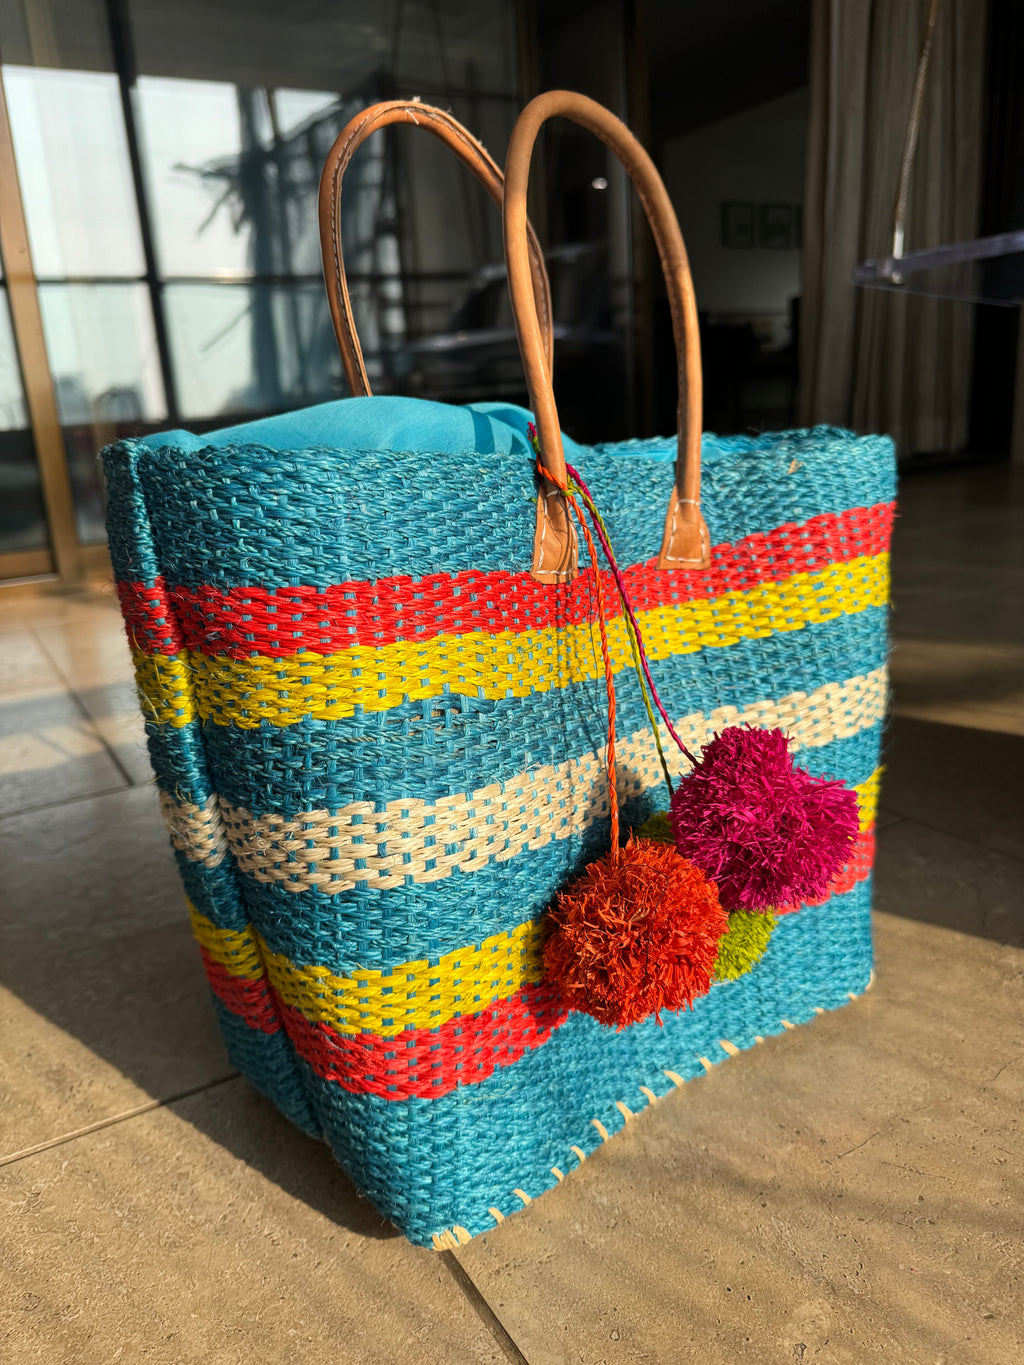 Online Beach Shop - Beach Bags - Beach Totes - Bags to carry to poolside - Beach Company INDIA